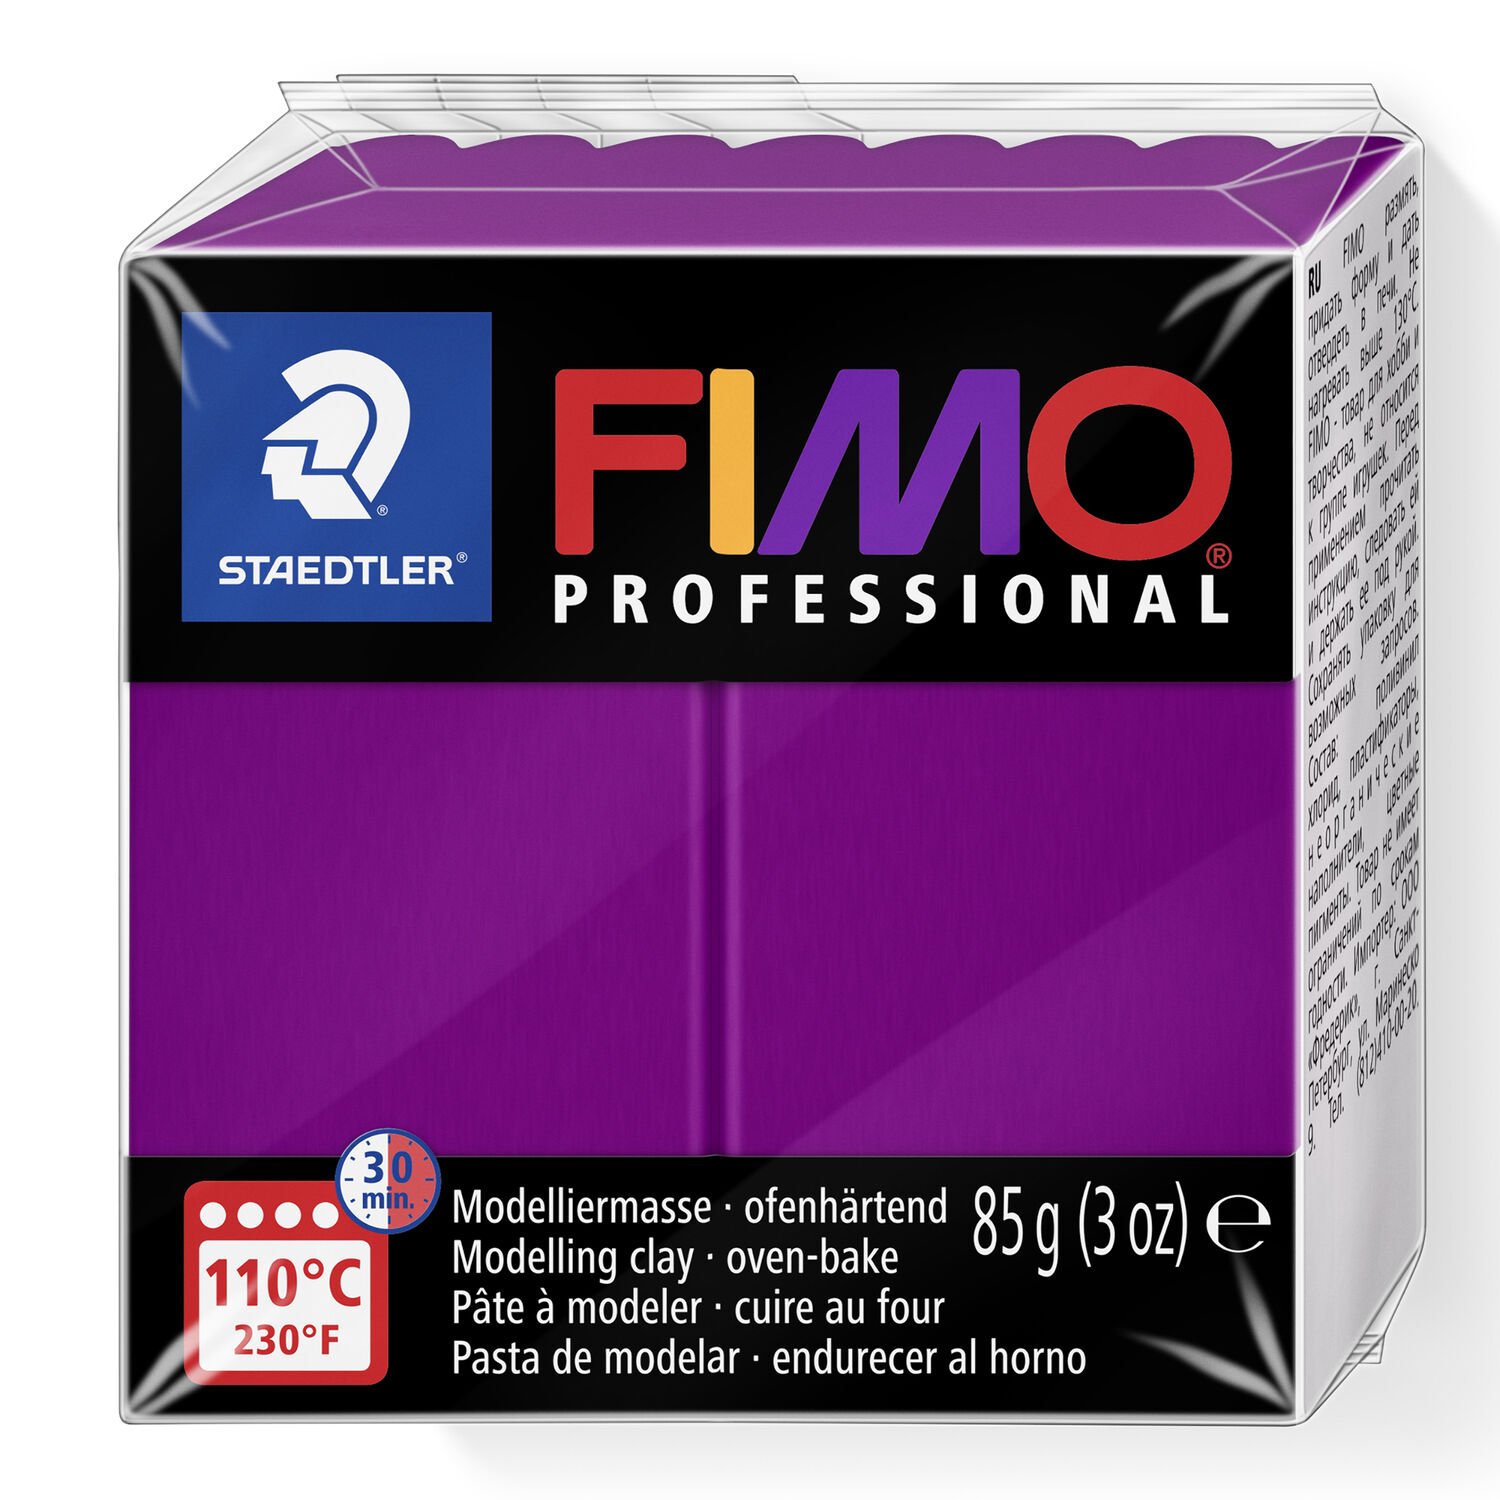 FIMO® professional 8004 - Oven-bake modelling clay